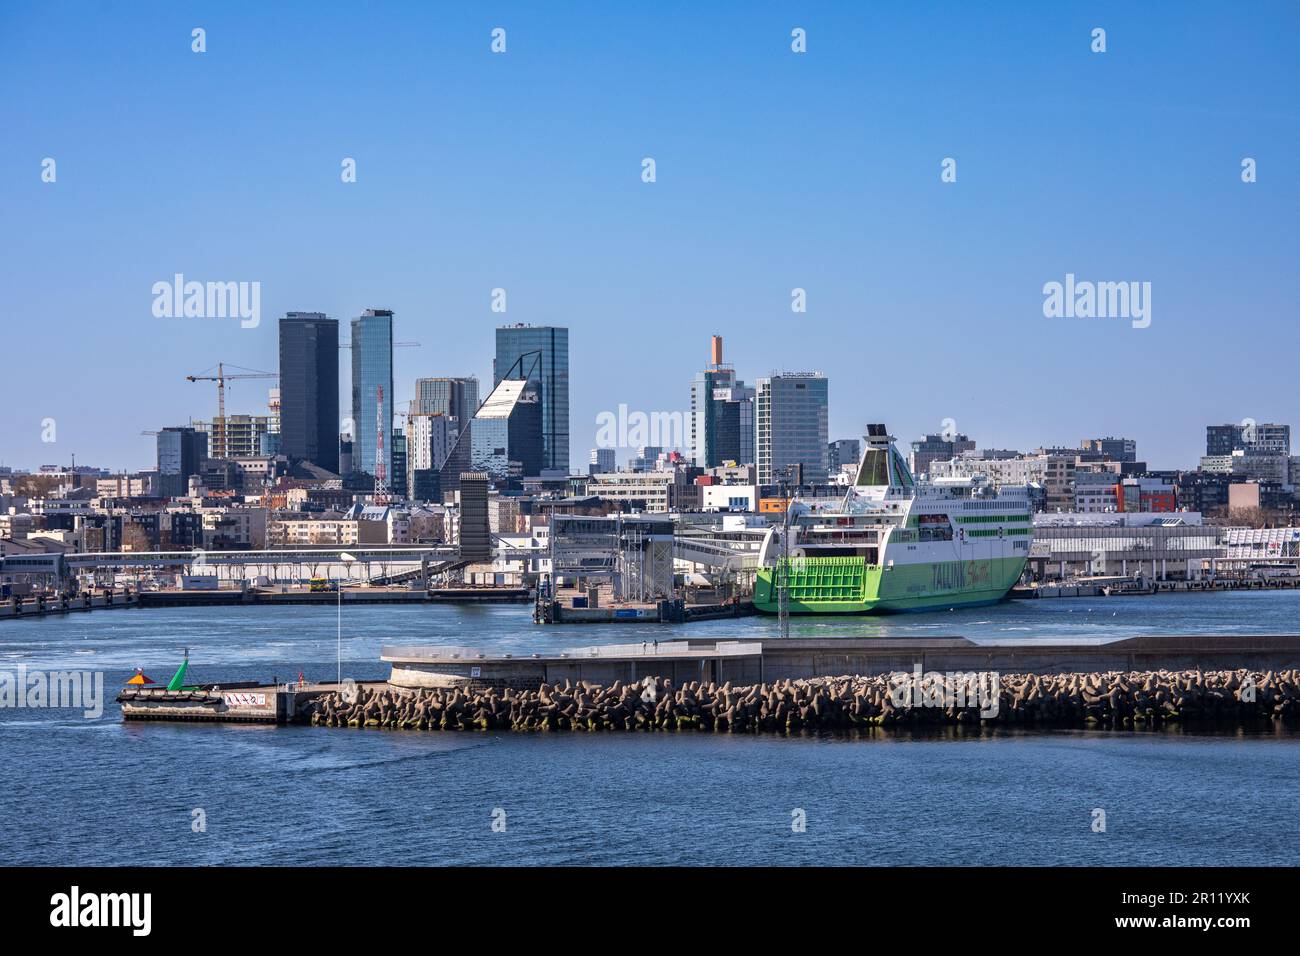 Breakwater, passenger harbor and high-rise buildings against clear blue sky viewed from the sea in Tallinn, Estonia Stock Photo